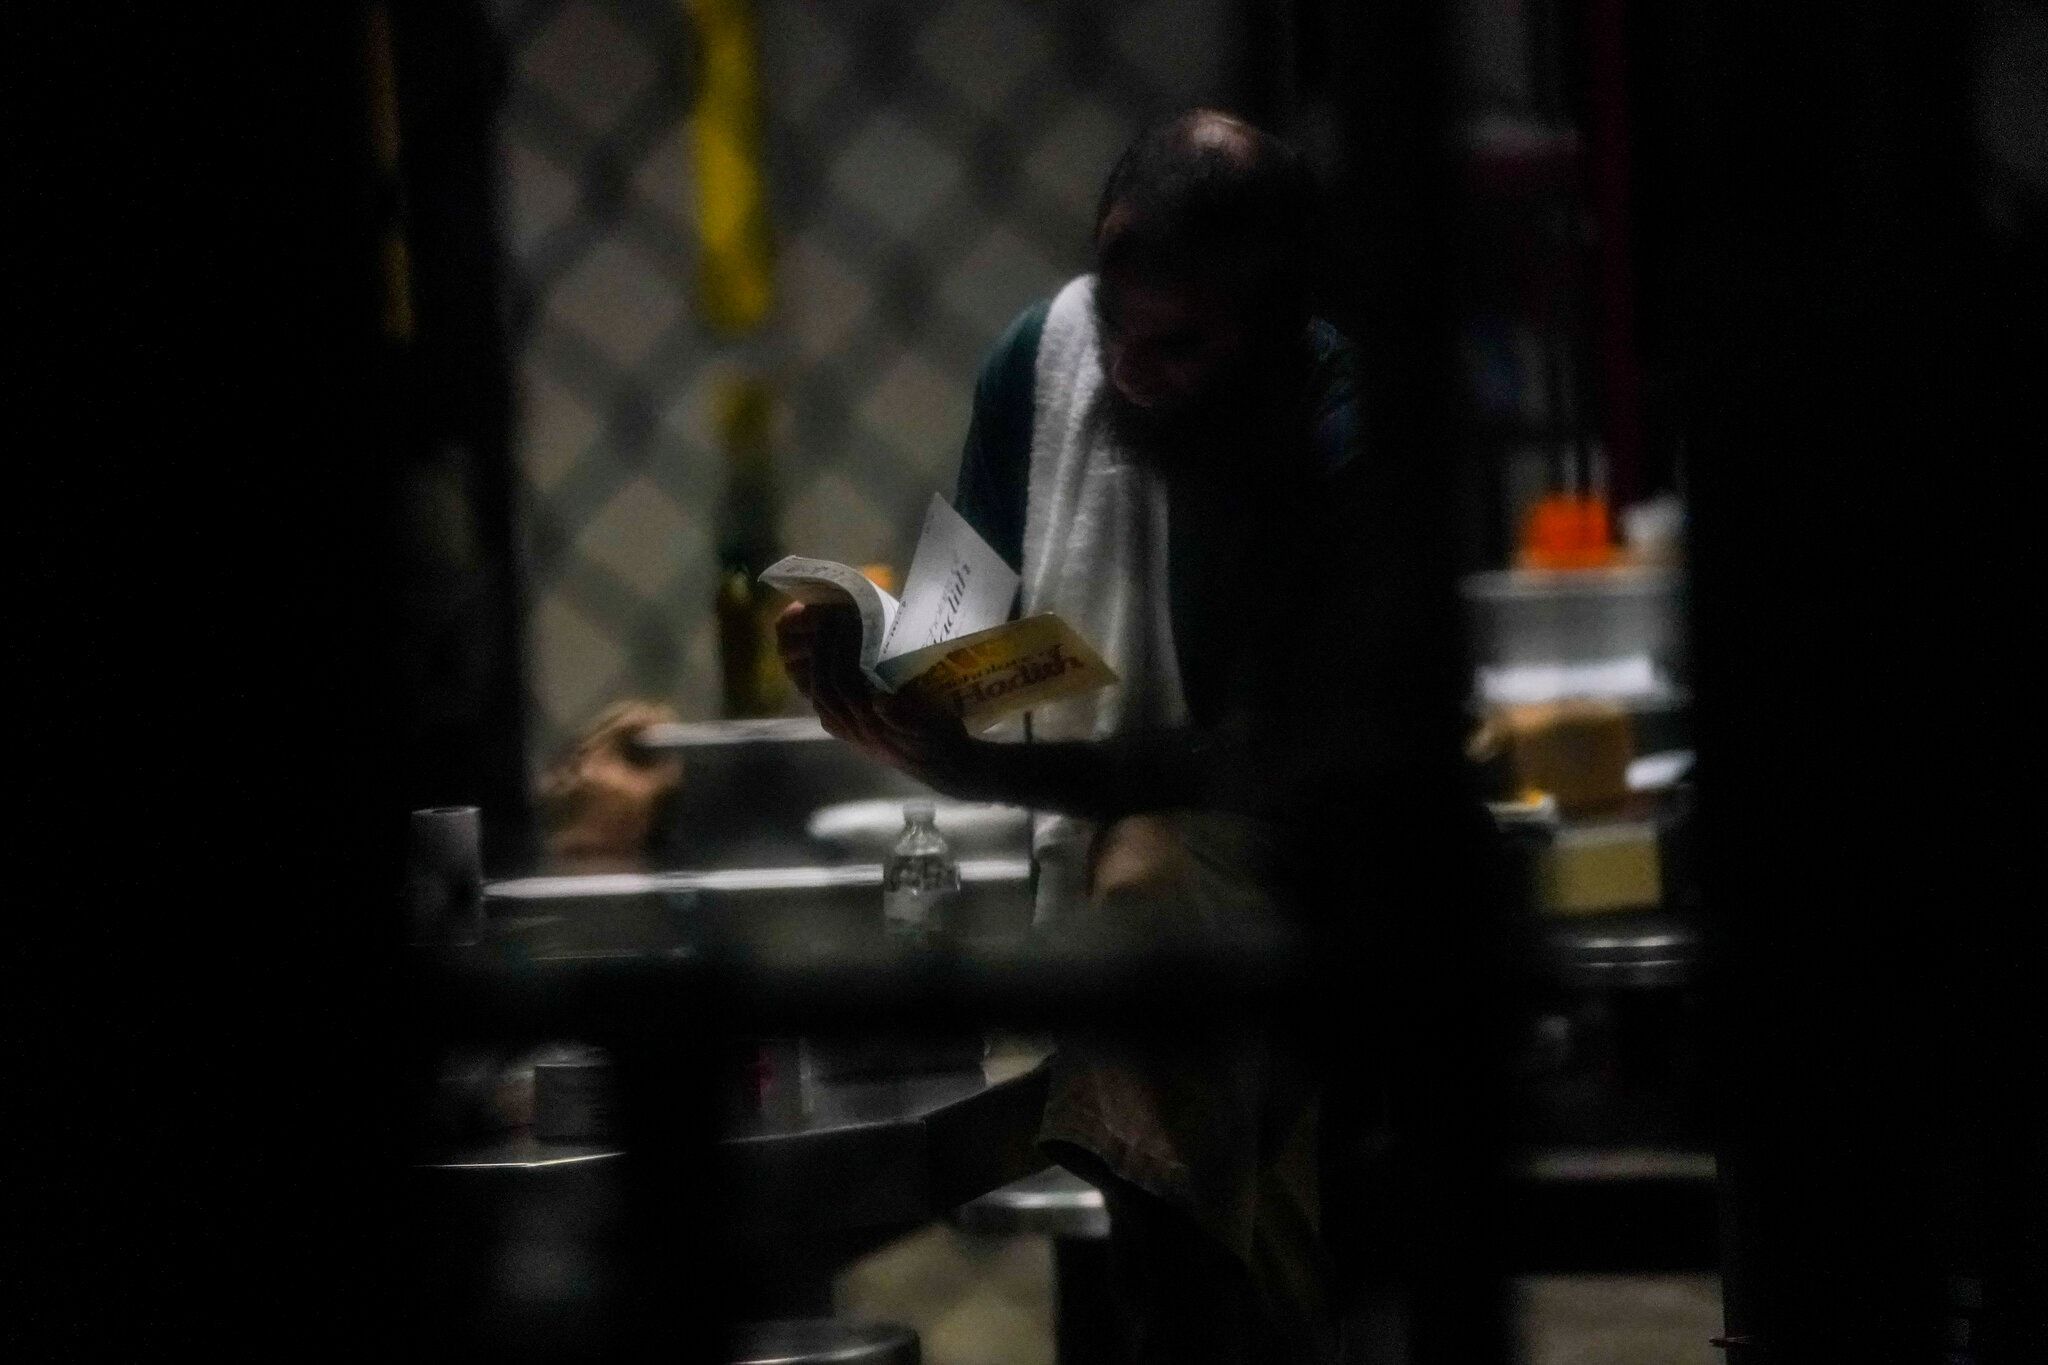 A detainee at Guantánamo Bay. The court’s decision may have implications for the 9/11 trial at Guantánamo. Image by Doug Mills/The New York Times. United States, undated.